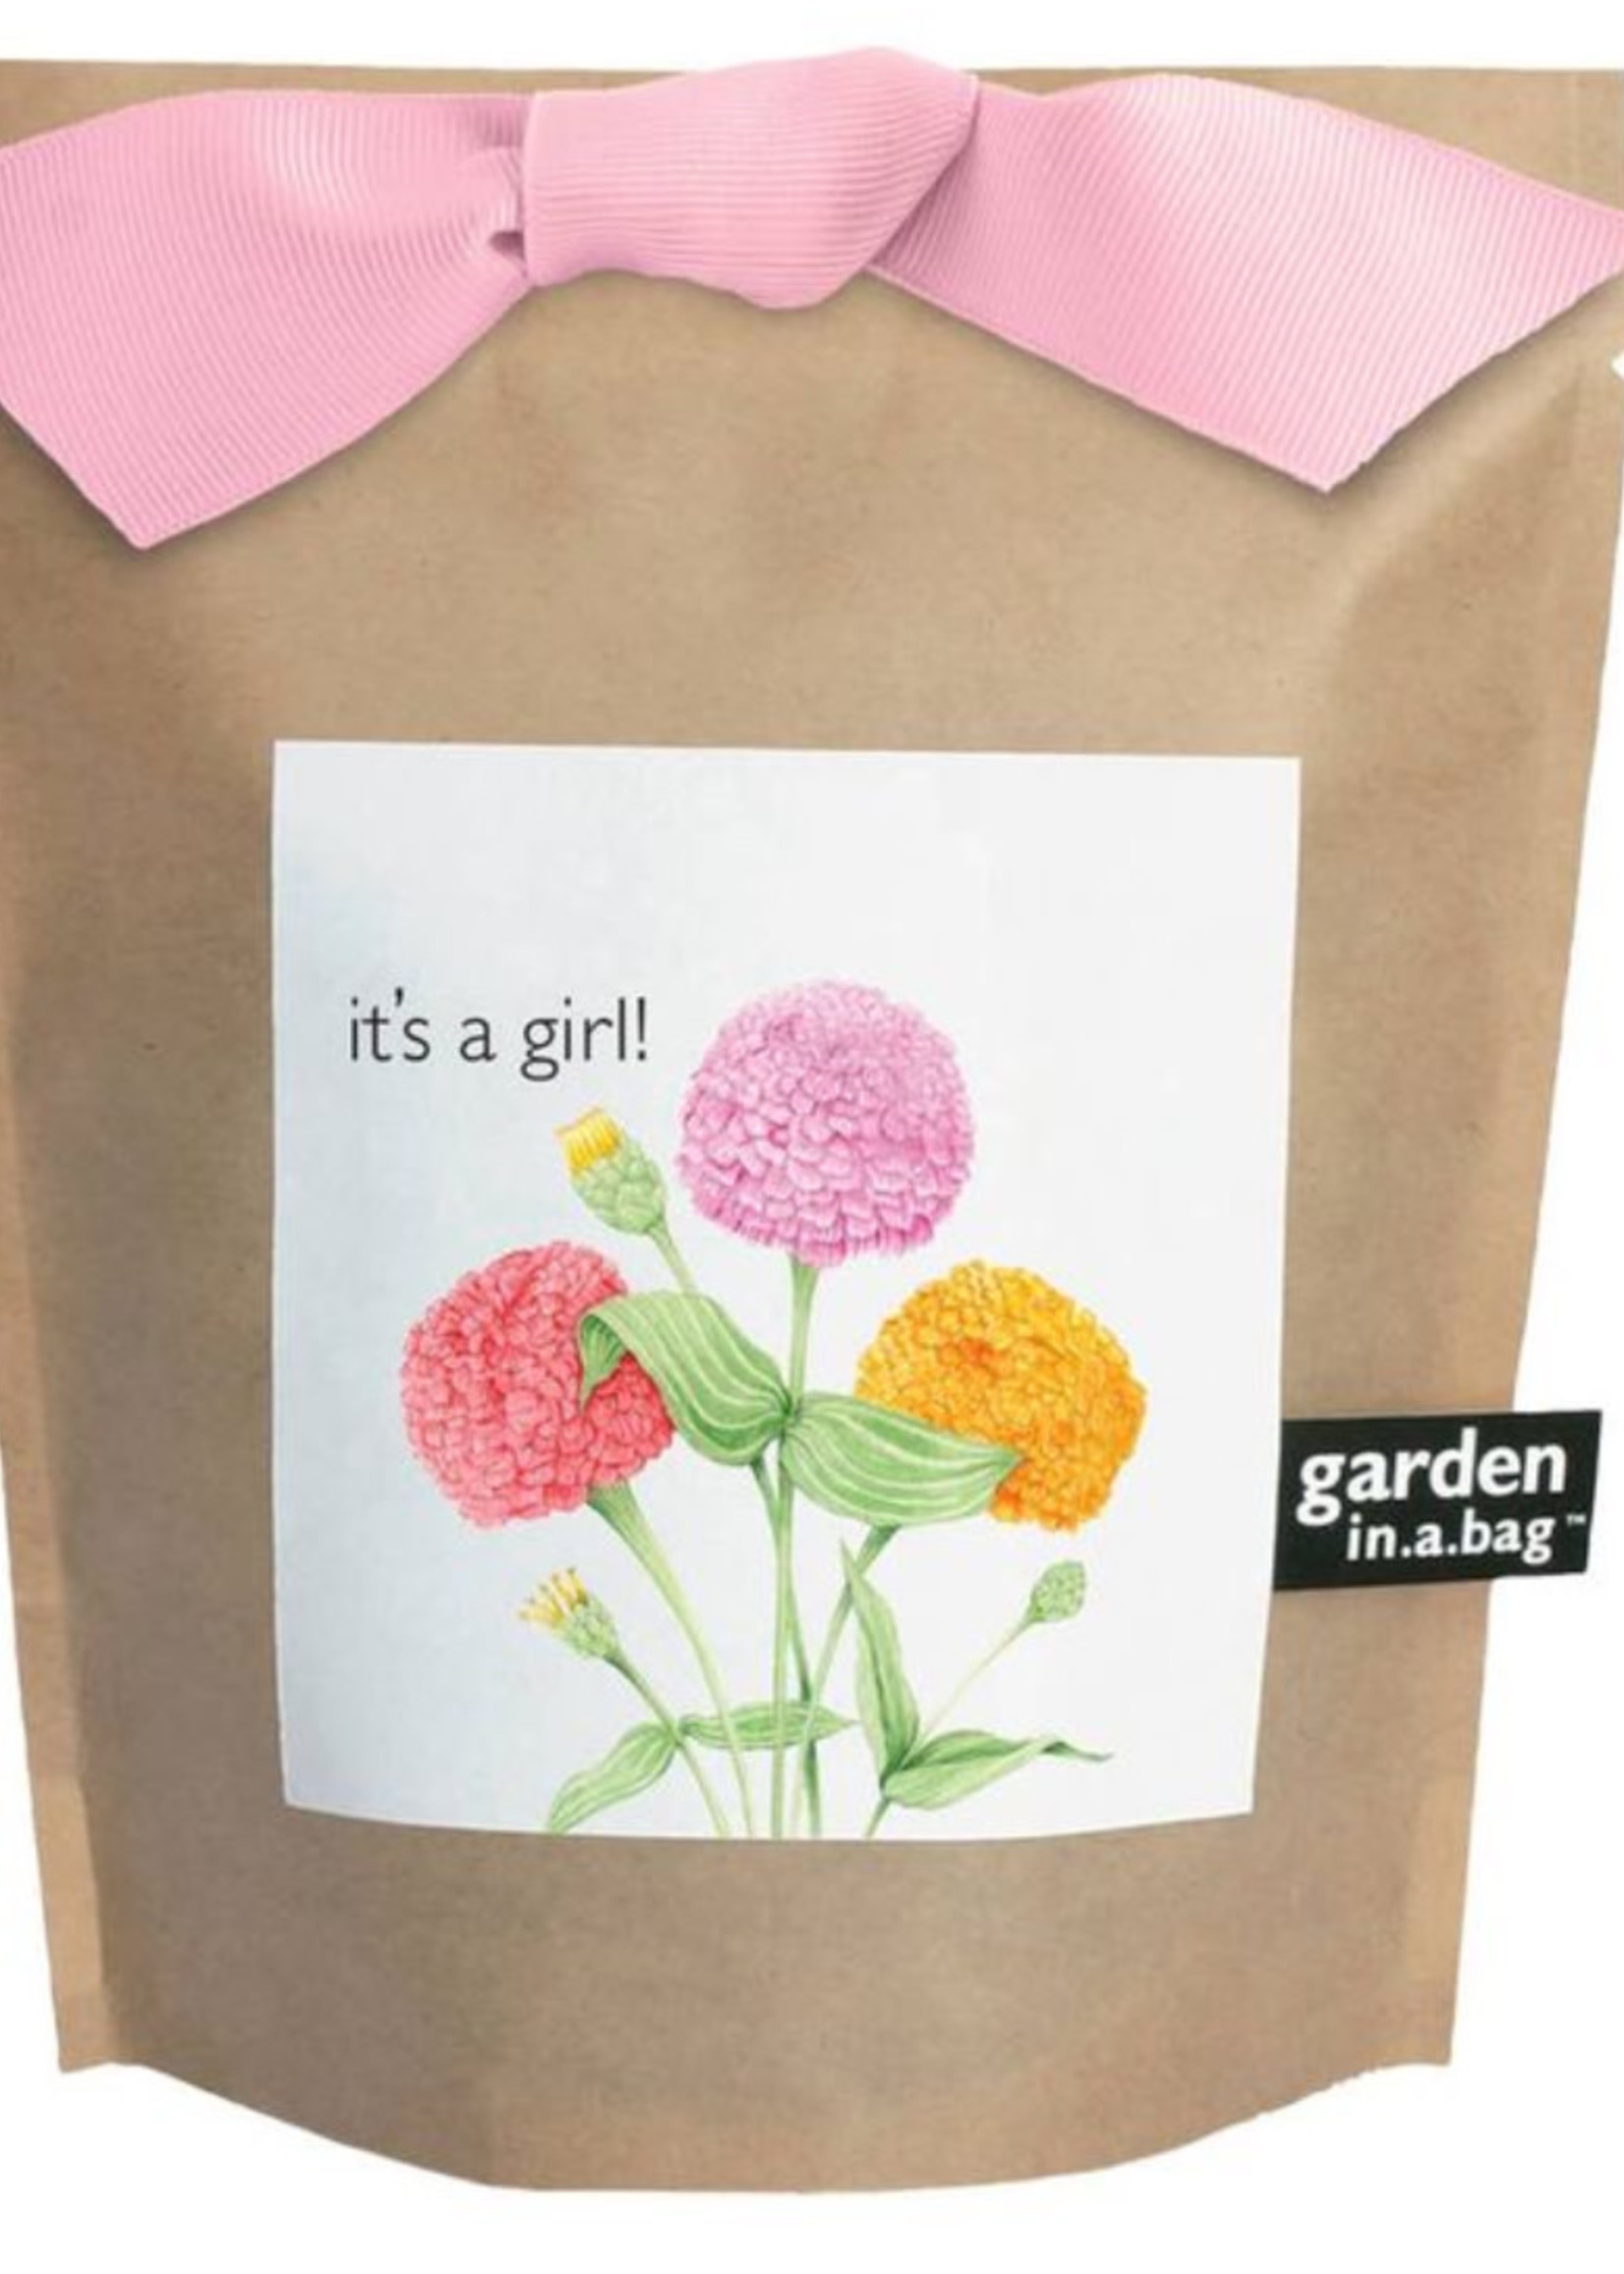 Potting Shed Garden in a Bag | It's a Girl